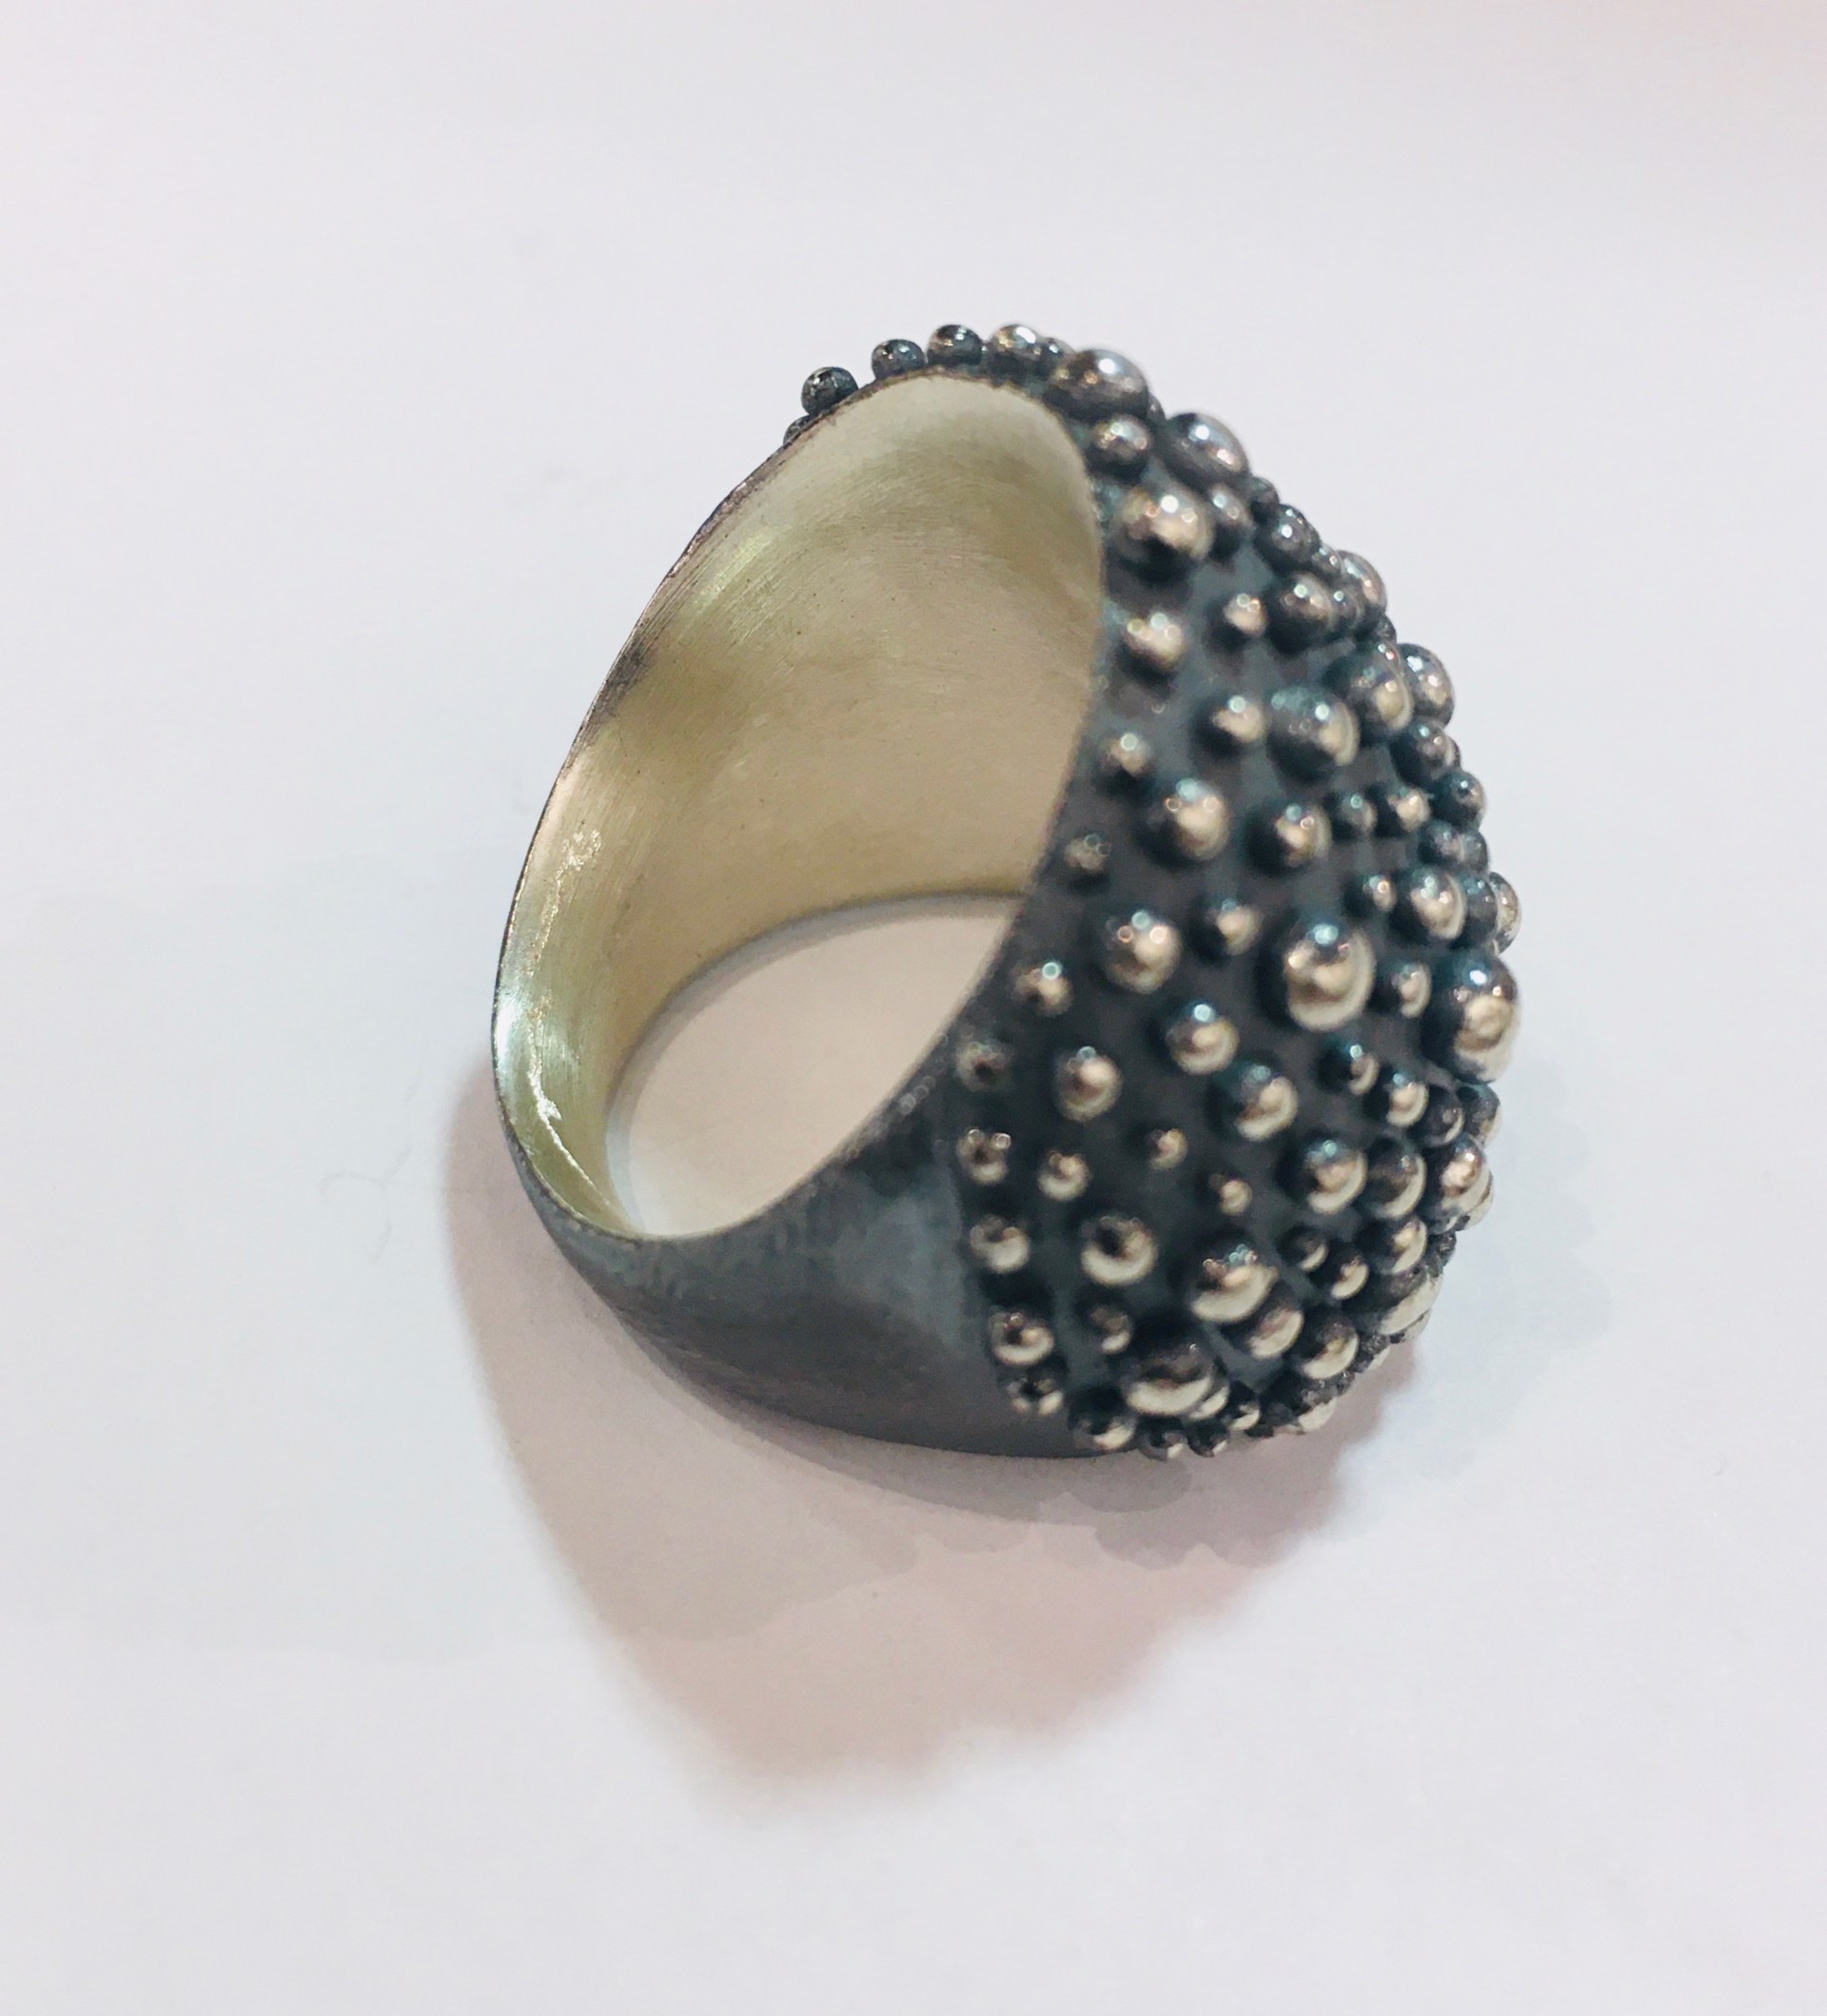 Oxidized Silver Ring by DAHLIA KANNER